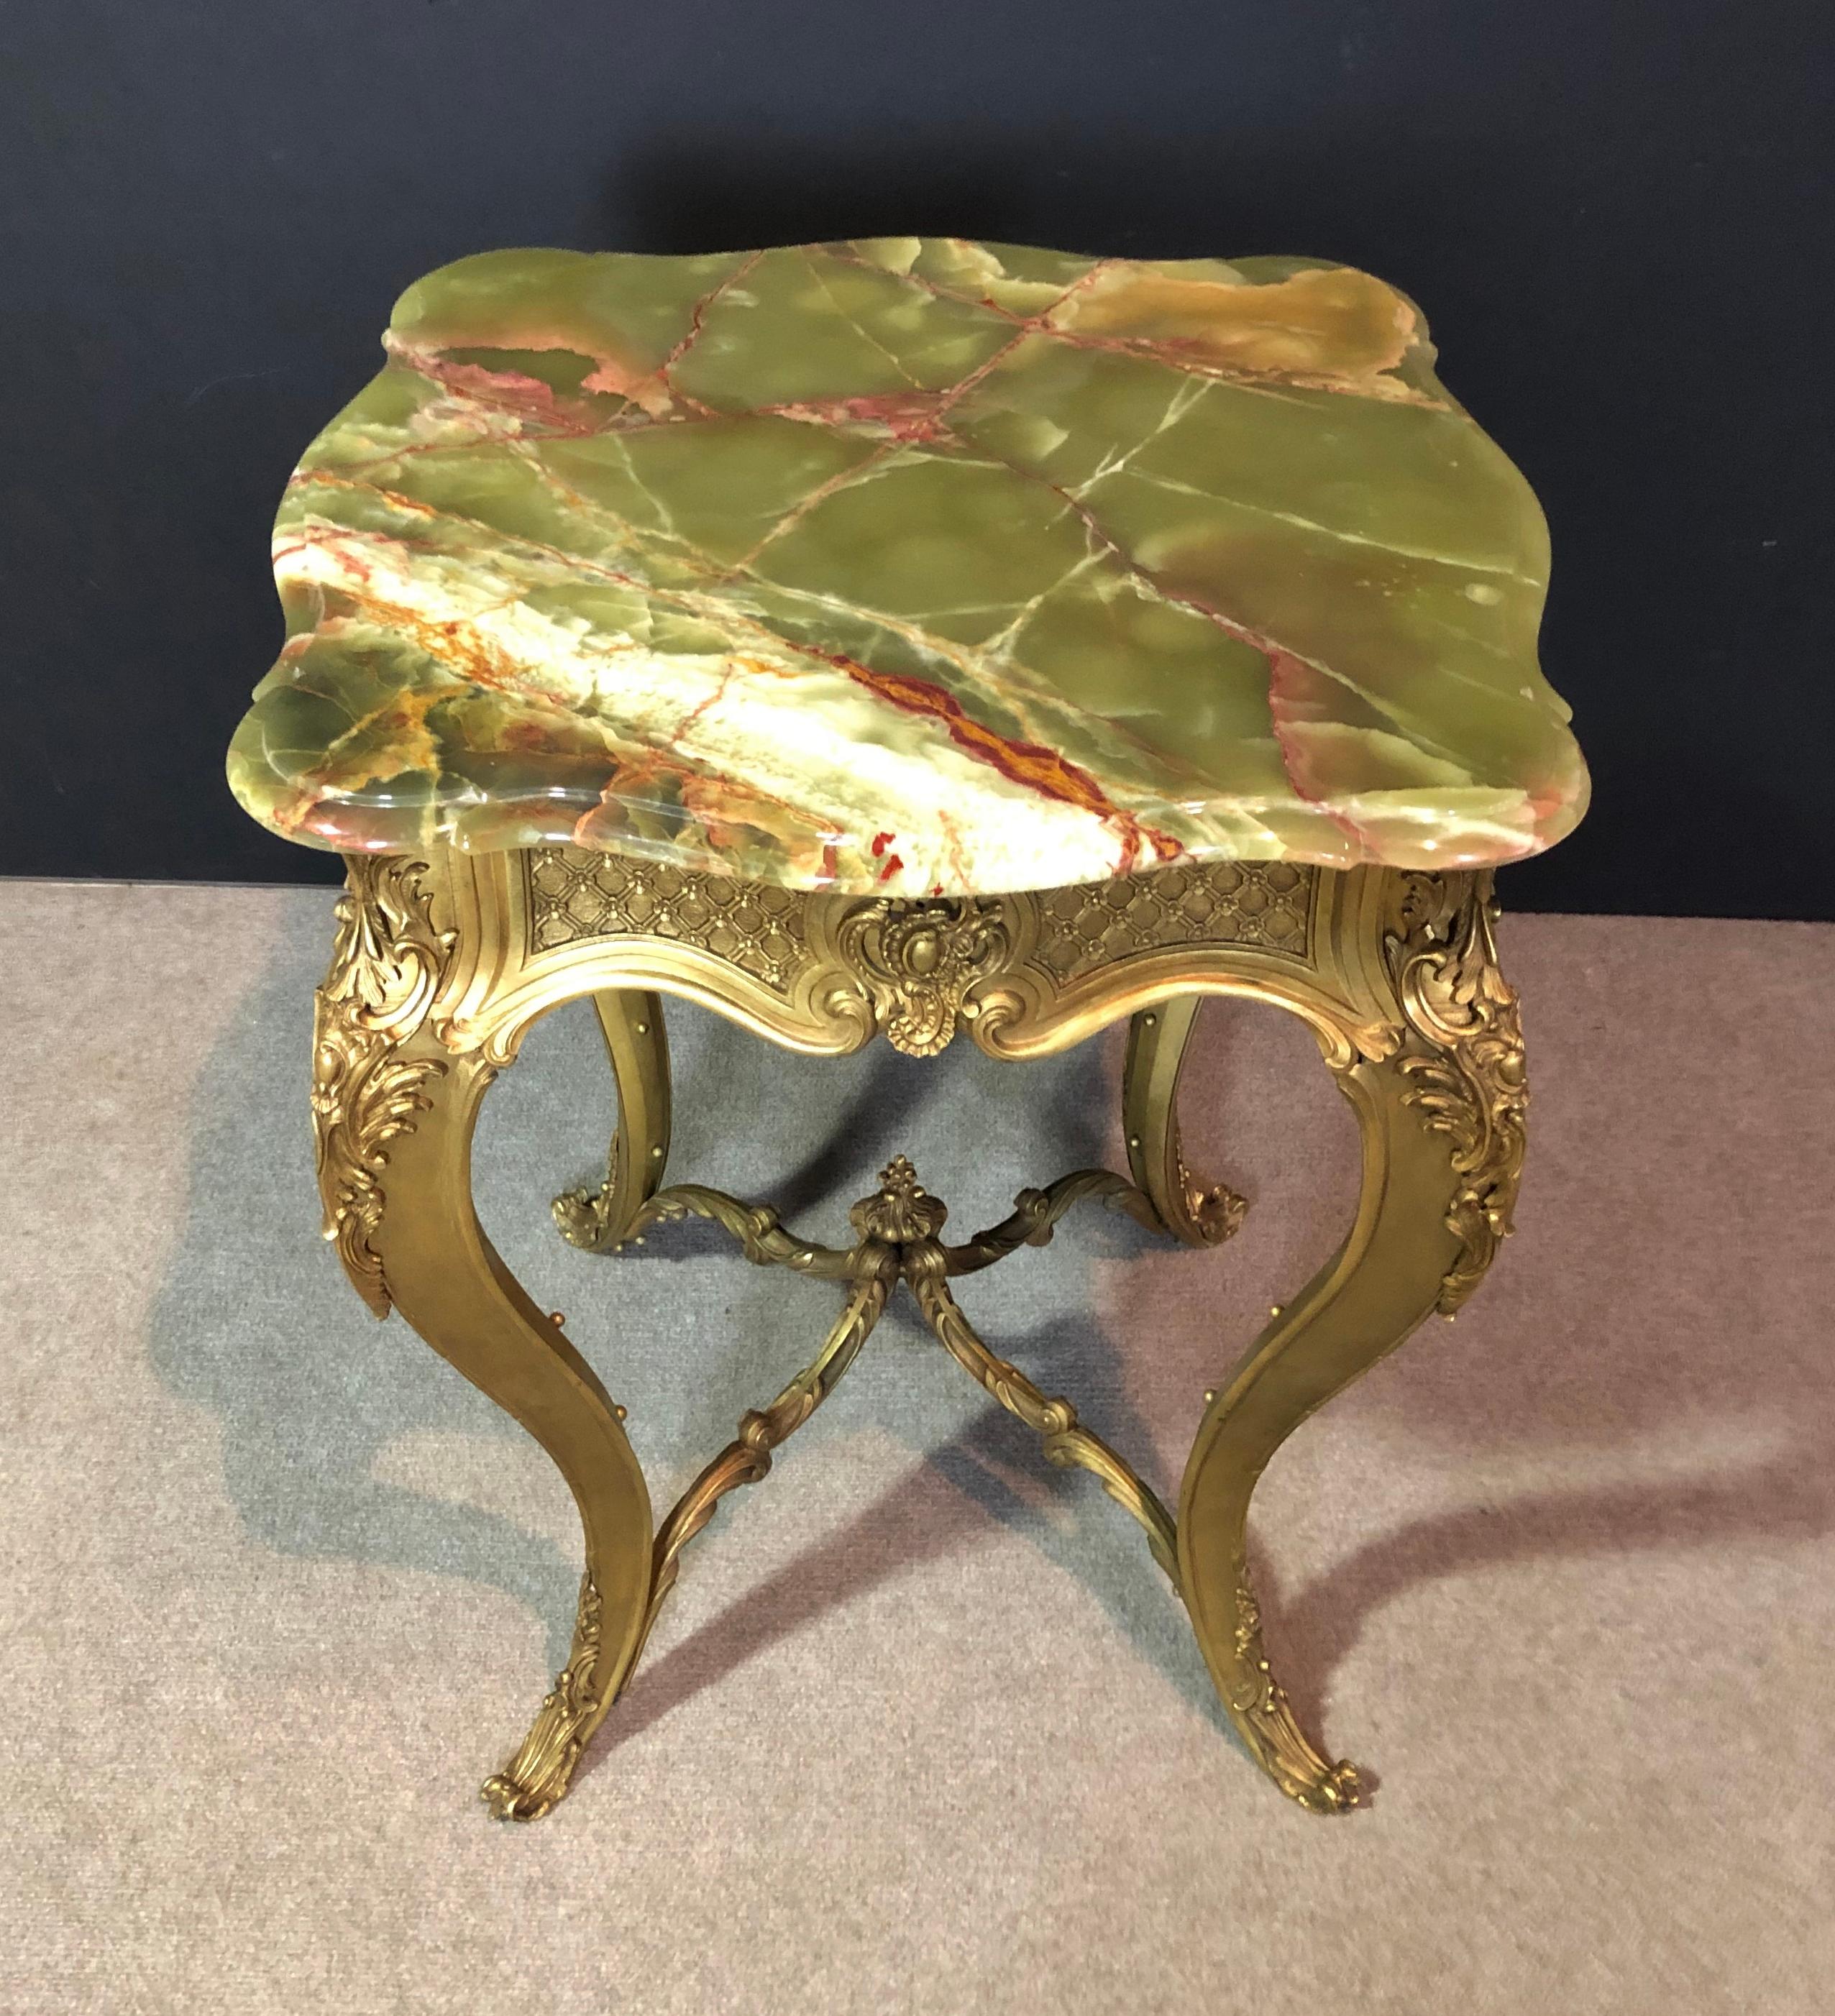 19th century Louis XV doré bronze and green onyx guéridon center table. Highly unusual and fine quality gilt bronze guéridon table with green onyx top. Rounded corners and scalloped sides. Nice ogee style edges to onyx. Some old repairs to onyx.